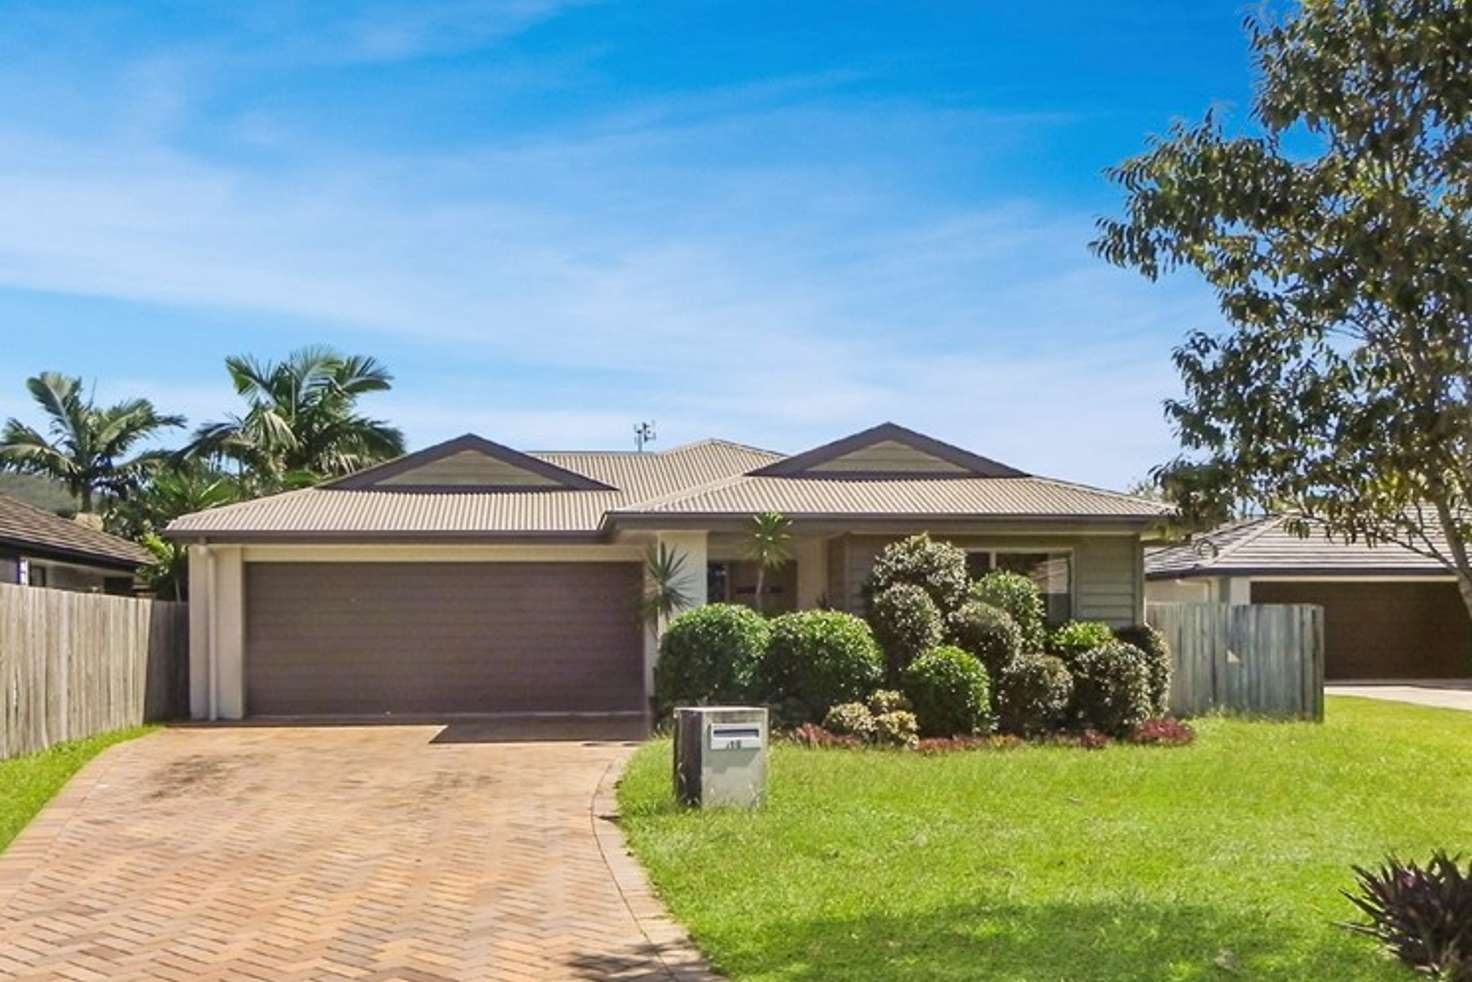 Main view of Homely house listing, 16 Woodgrove Bvd, Beerwah QLD 4519